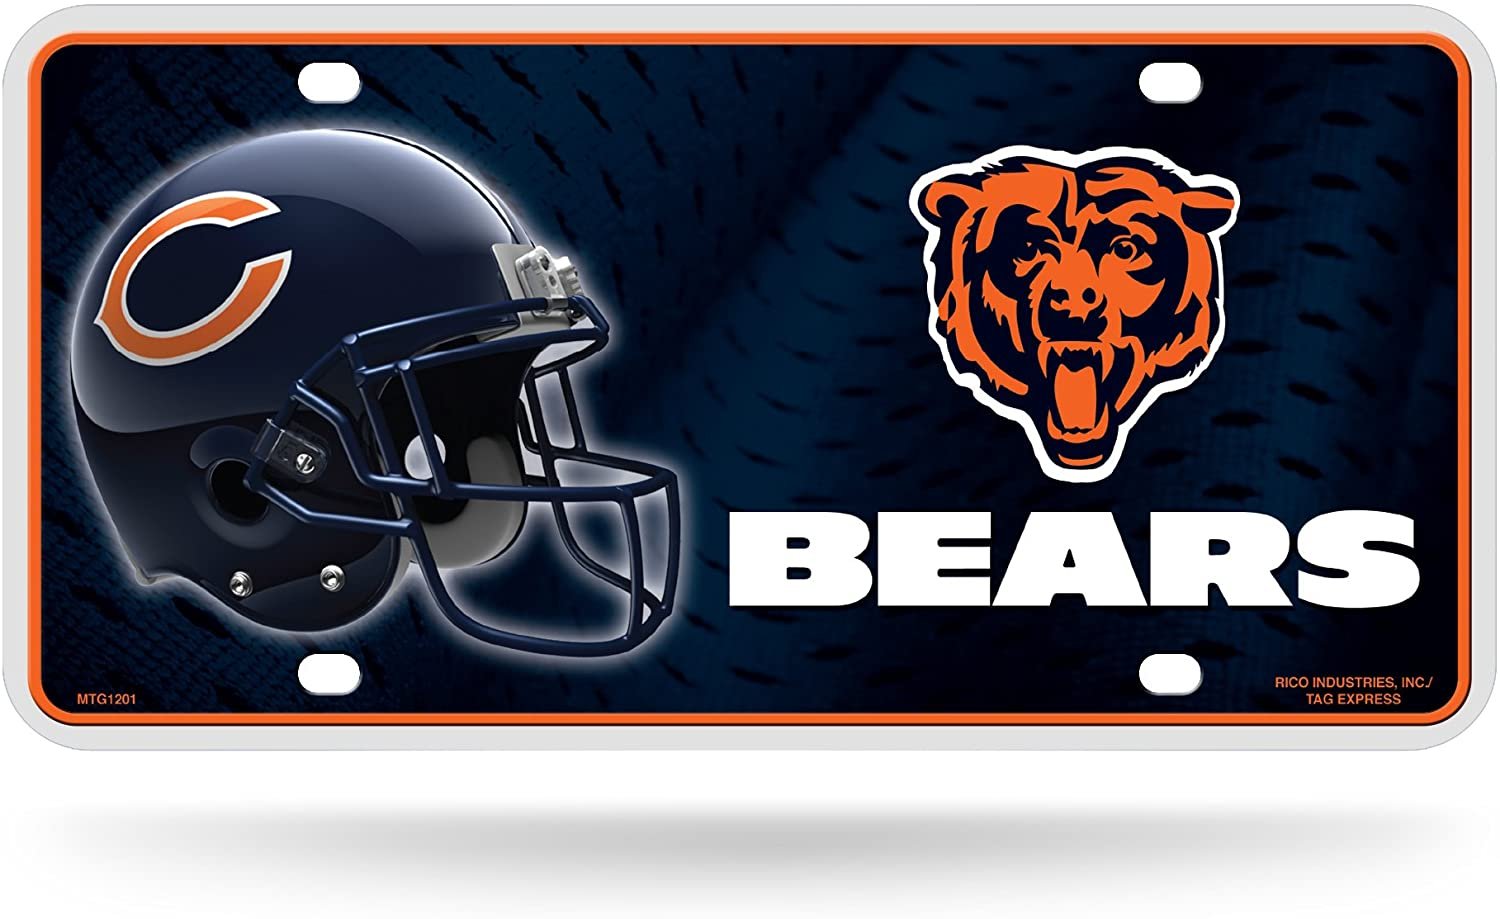 Chicago Bears Metal Auto Tag License Plate, Helmet Design, 12x6 Inch